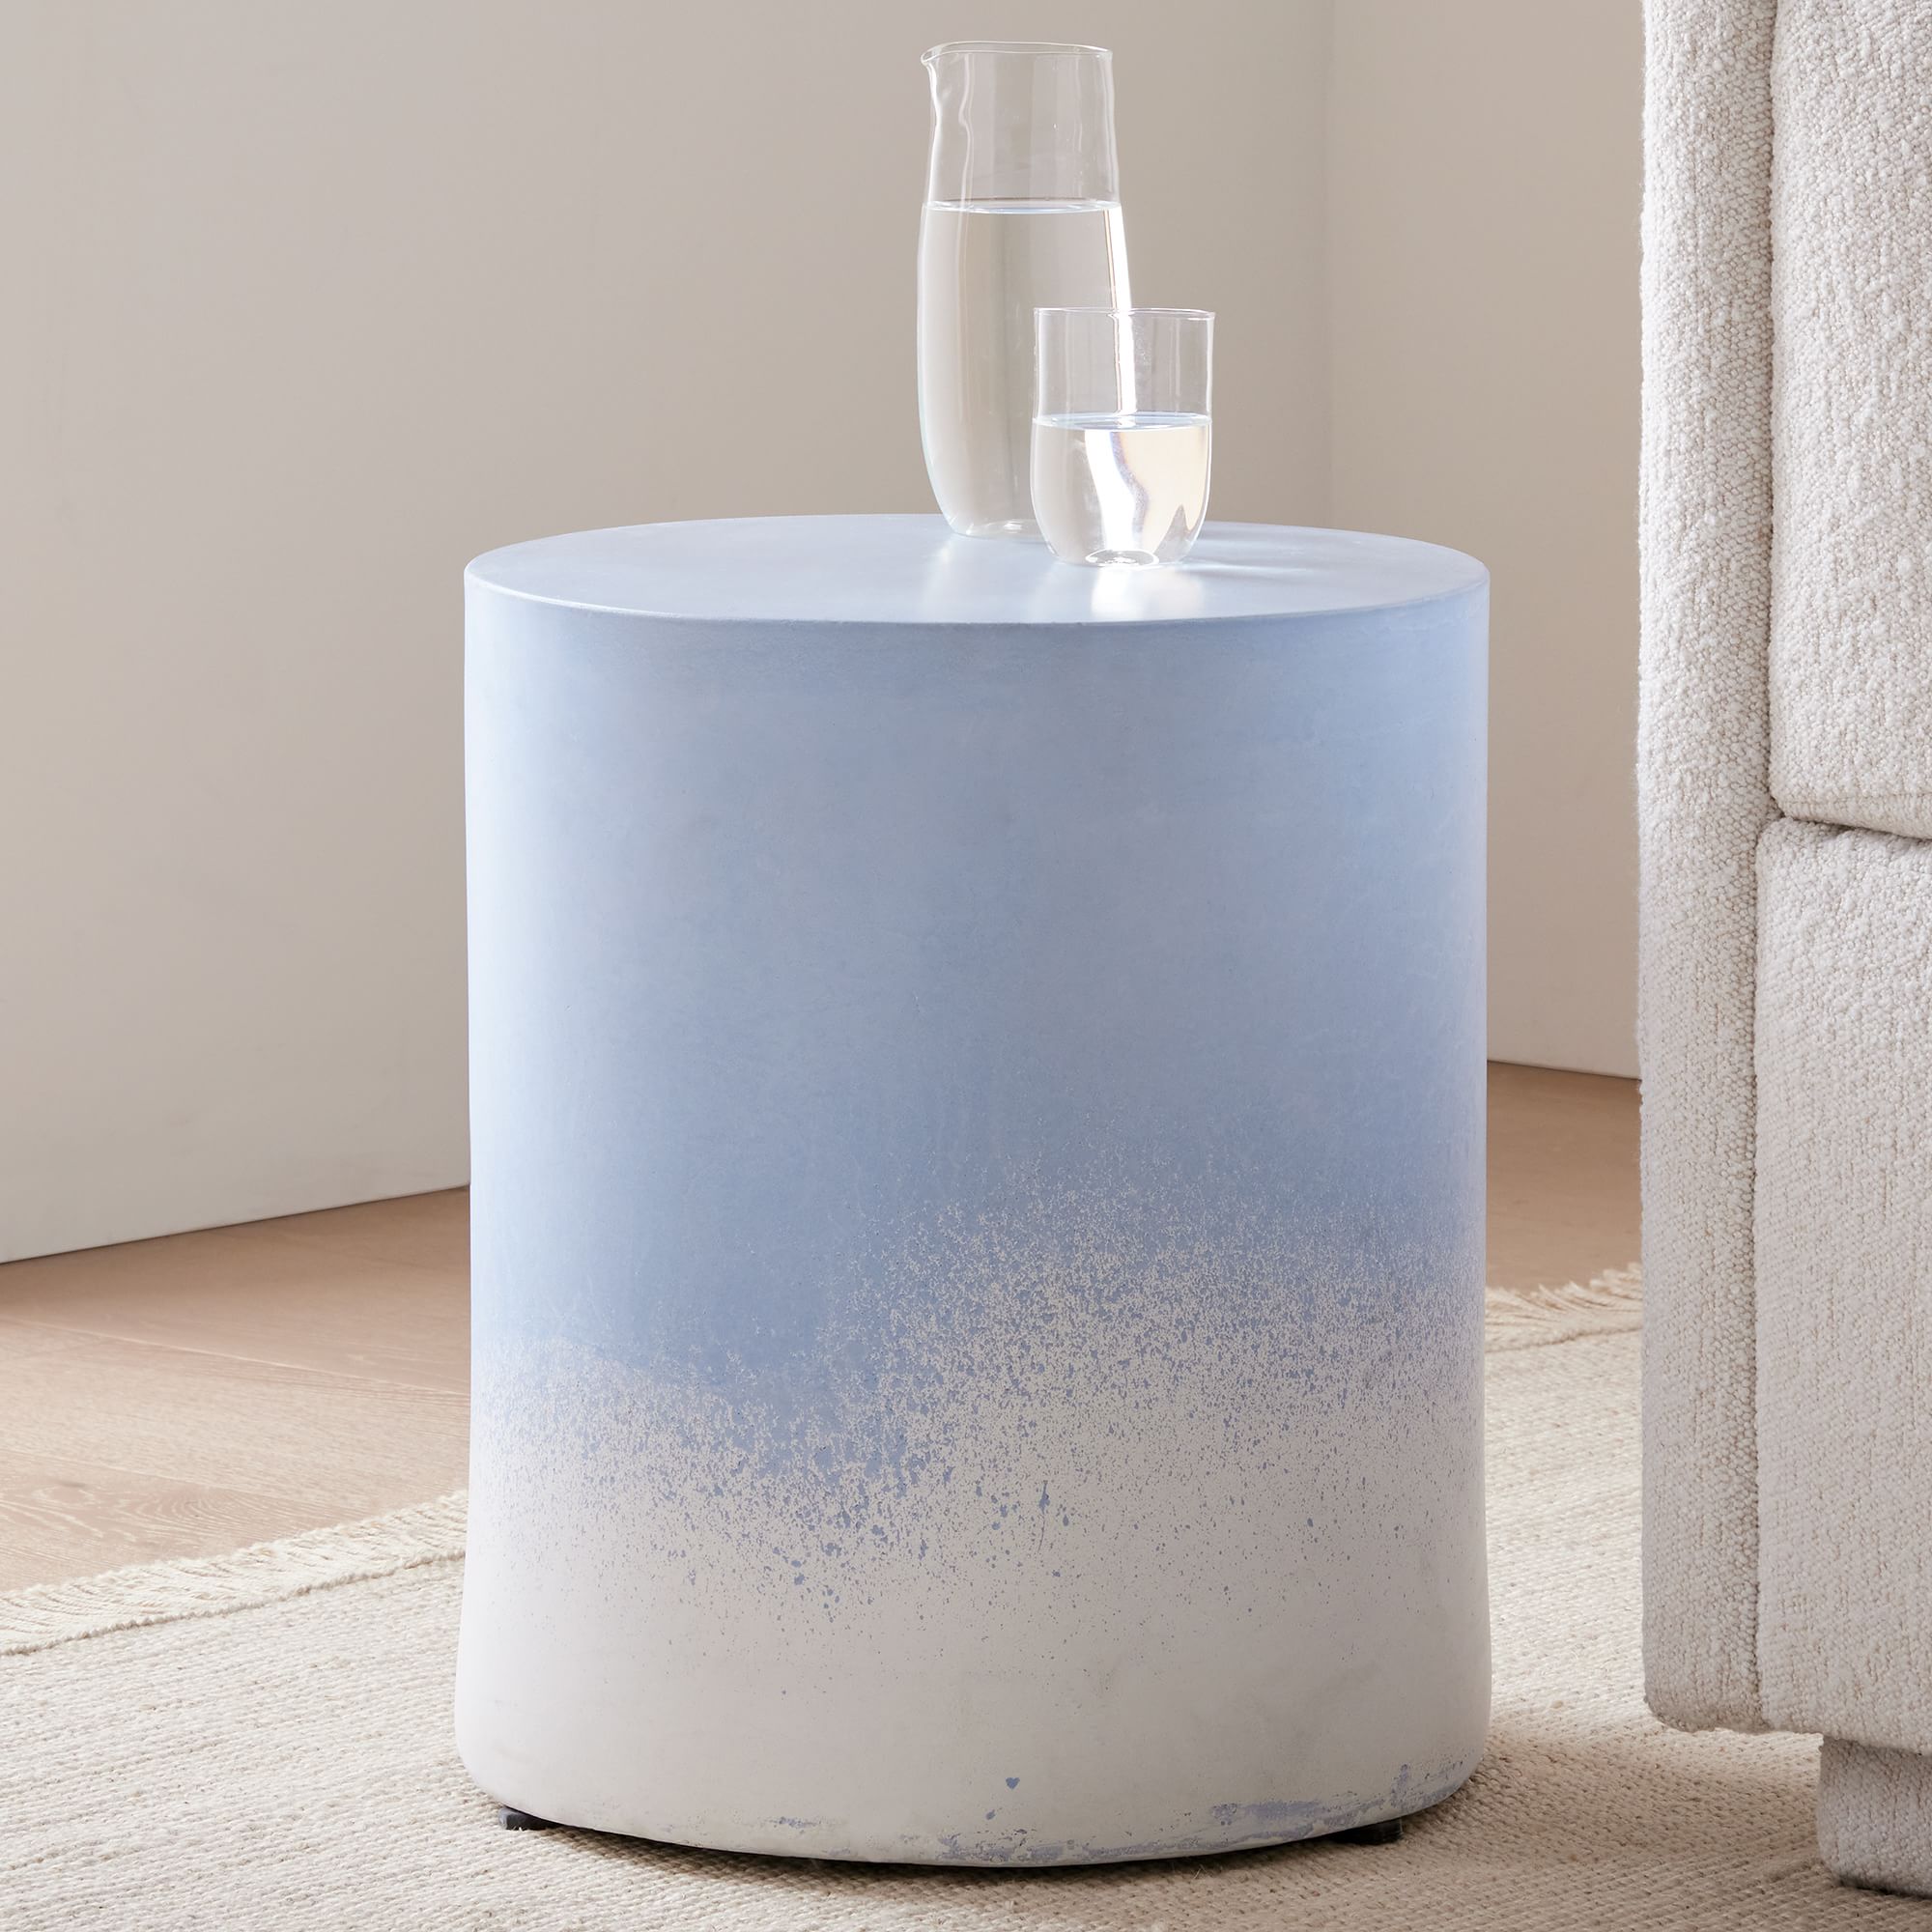 The Manza Side Table